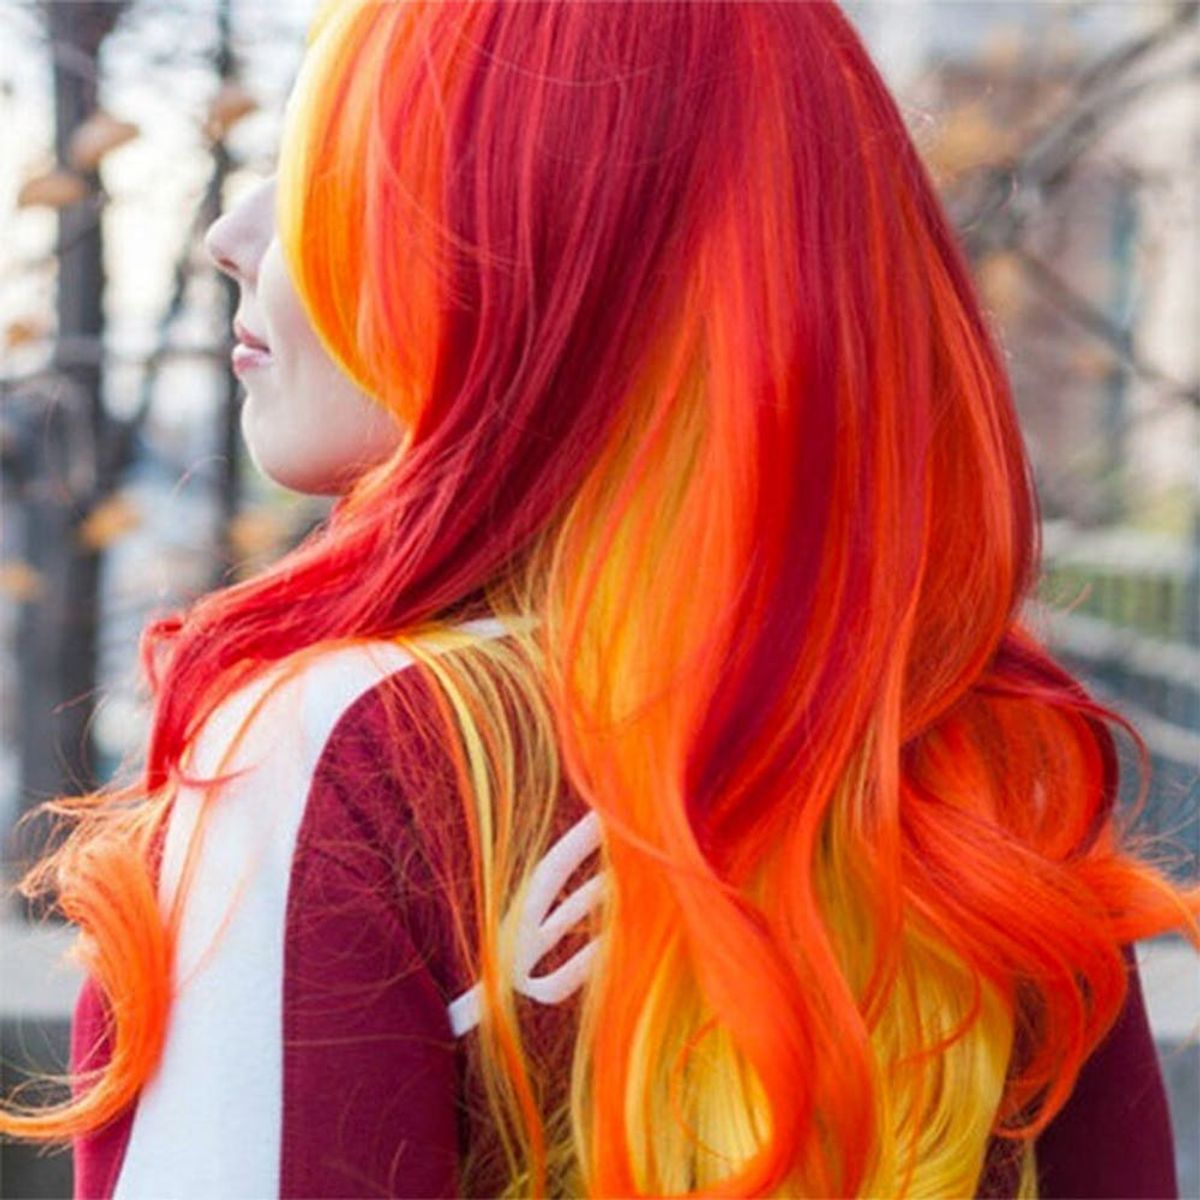 This New Hair Color Trend Has Already Replaced Rainbow Hair